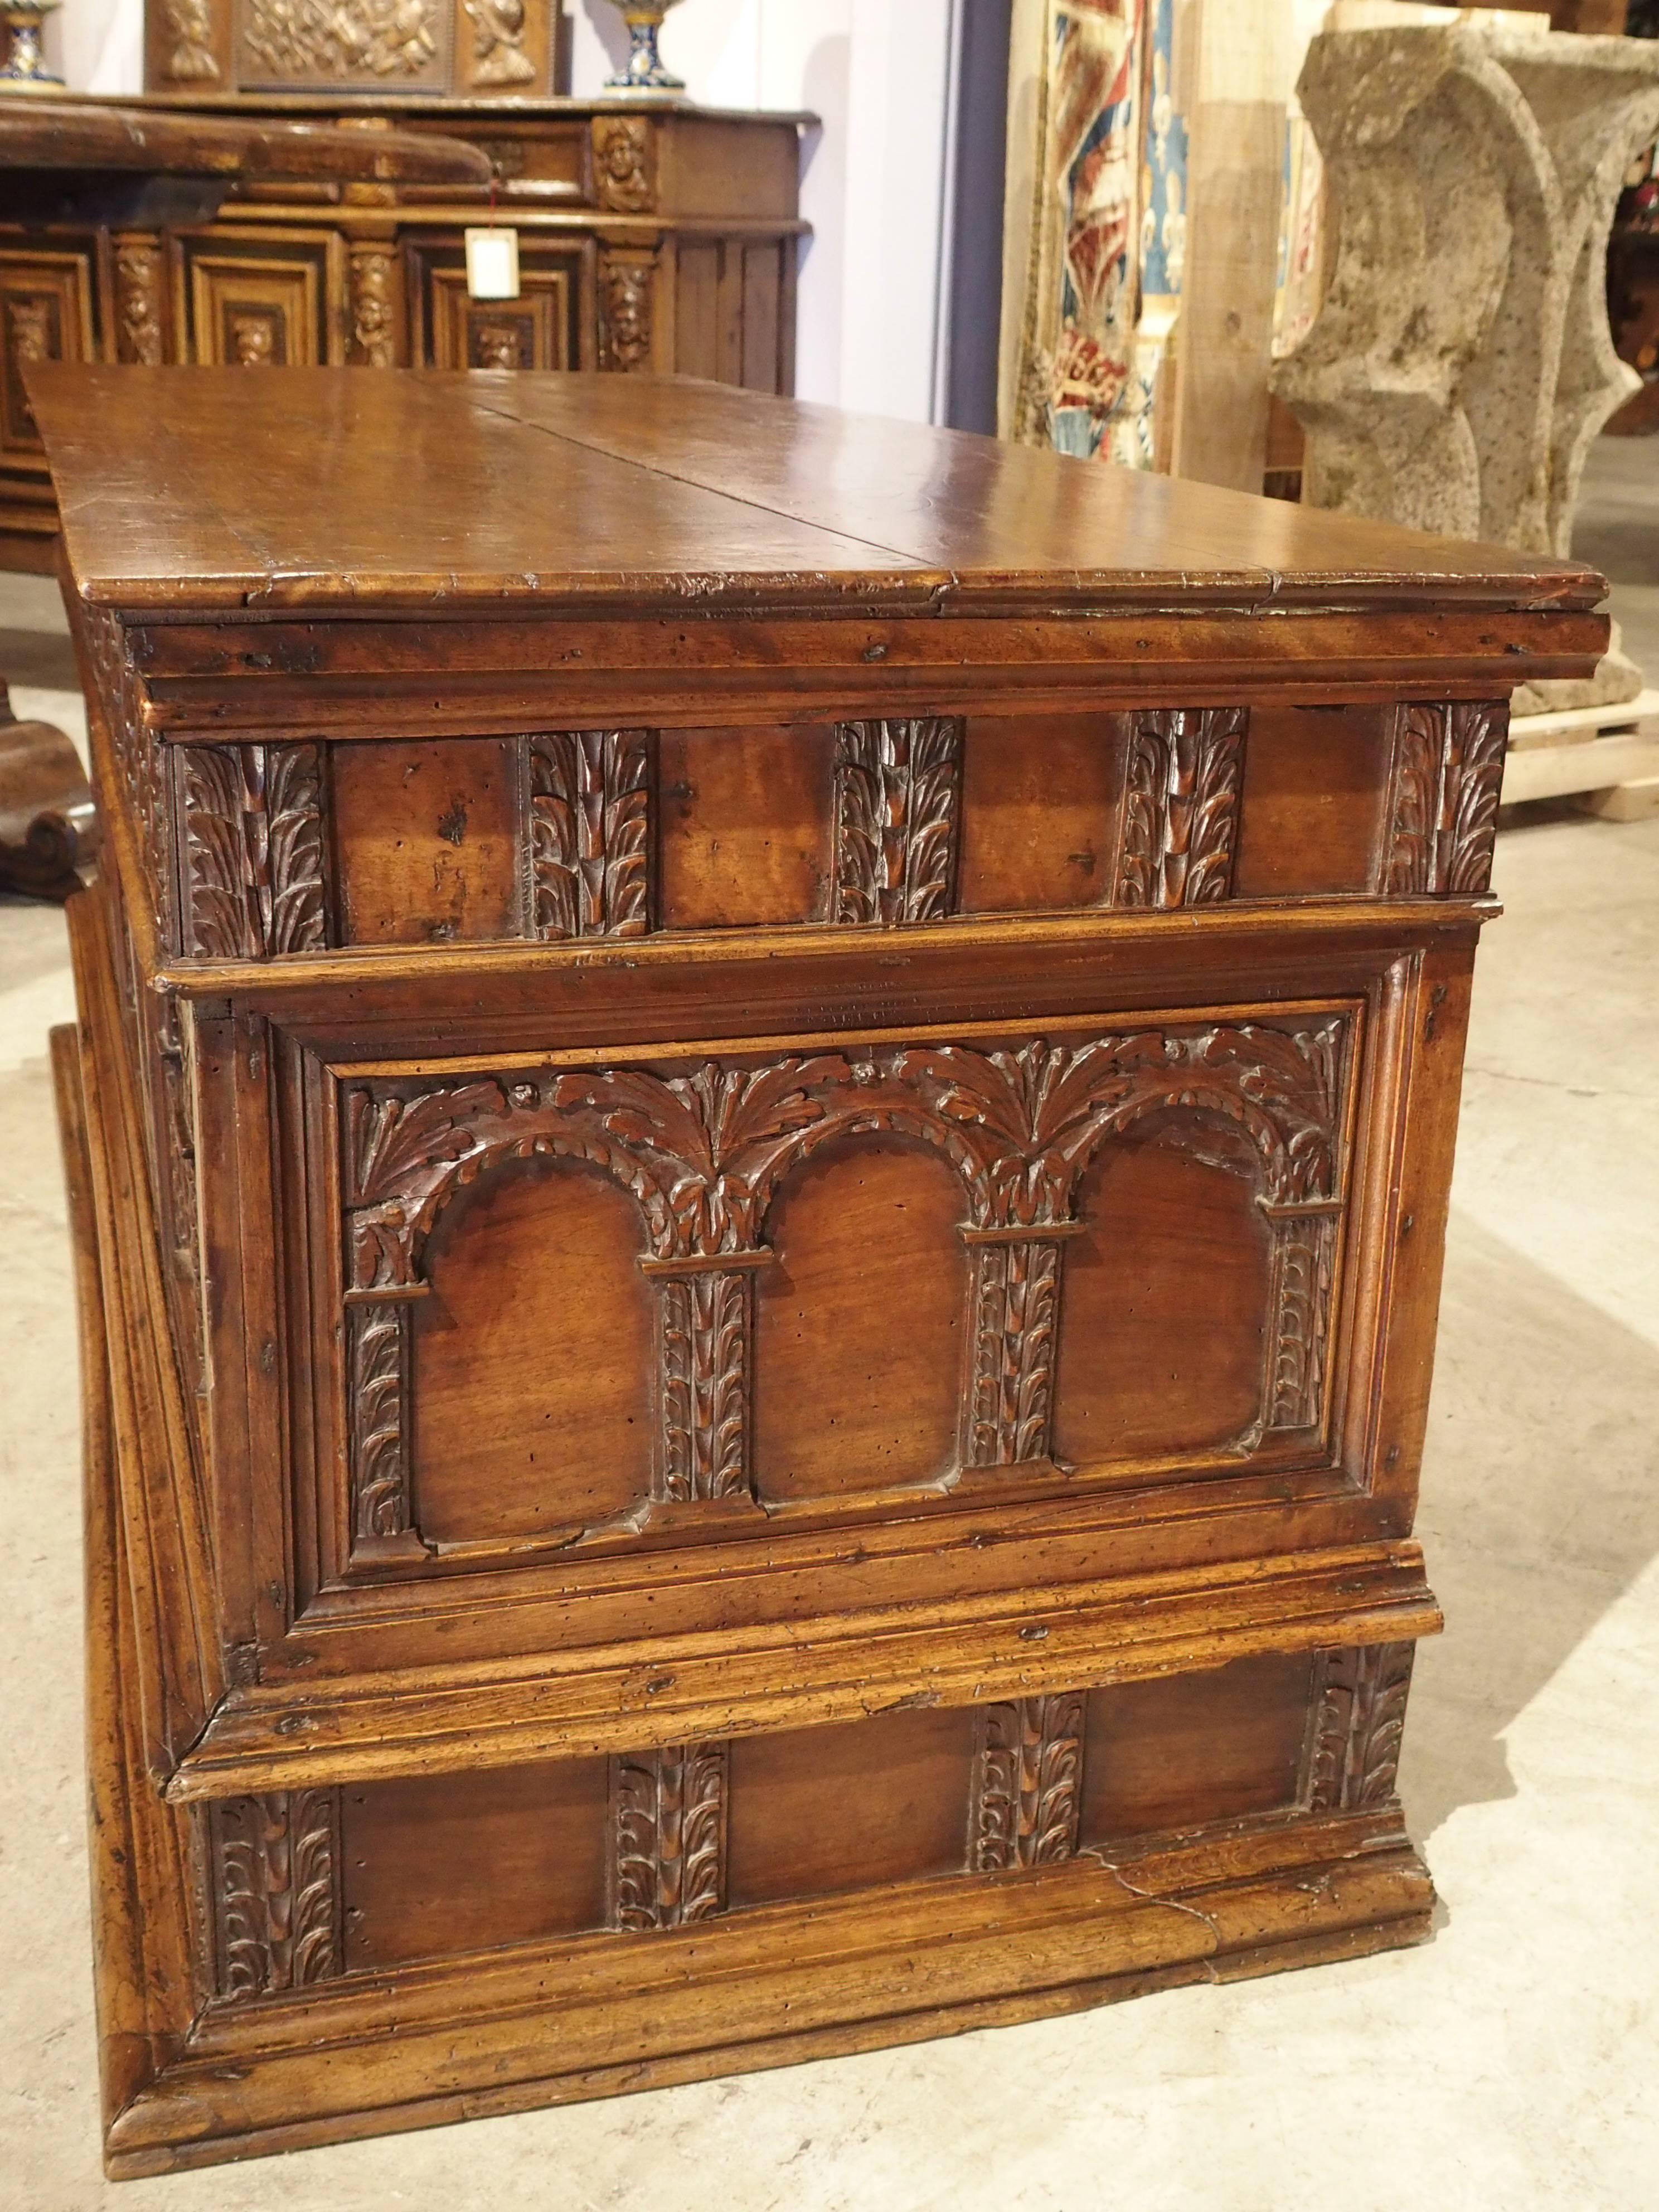 This elegant 18th century walnut wood Italian trunk is in the early Renaissance style. It's predominant motif is multiple architectural arcading. Other motifs are foliate in nature throughout the trunk. There is a wonderful, unusual detail which is